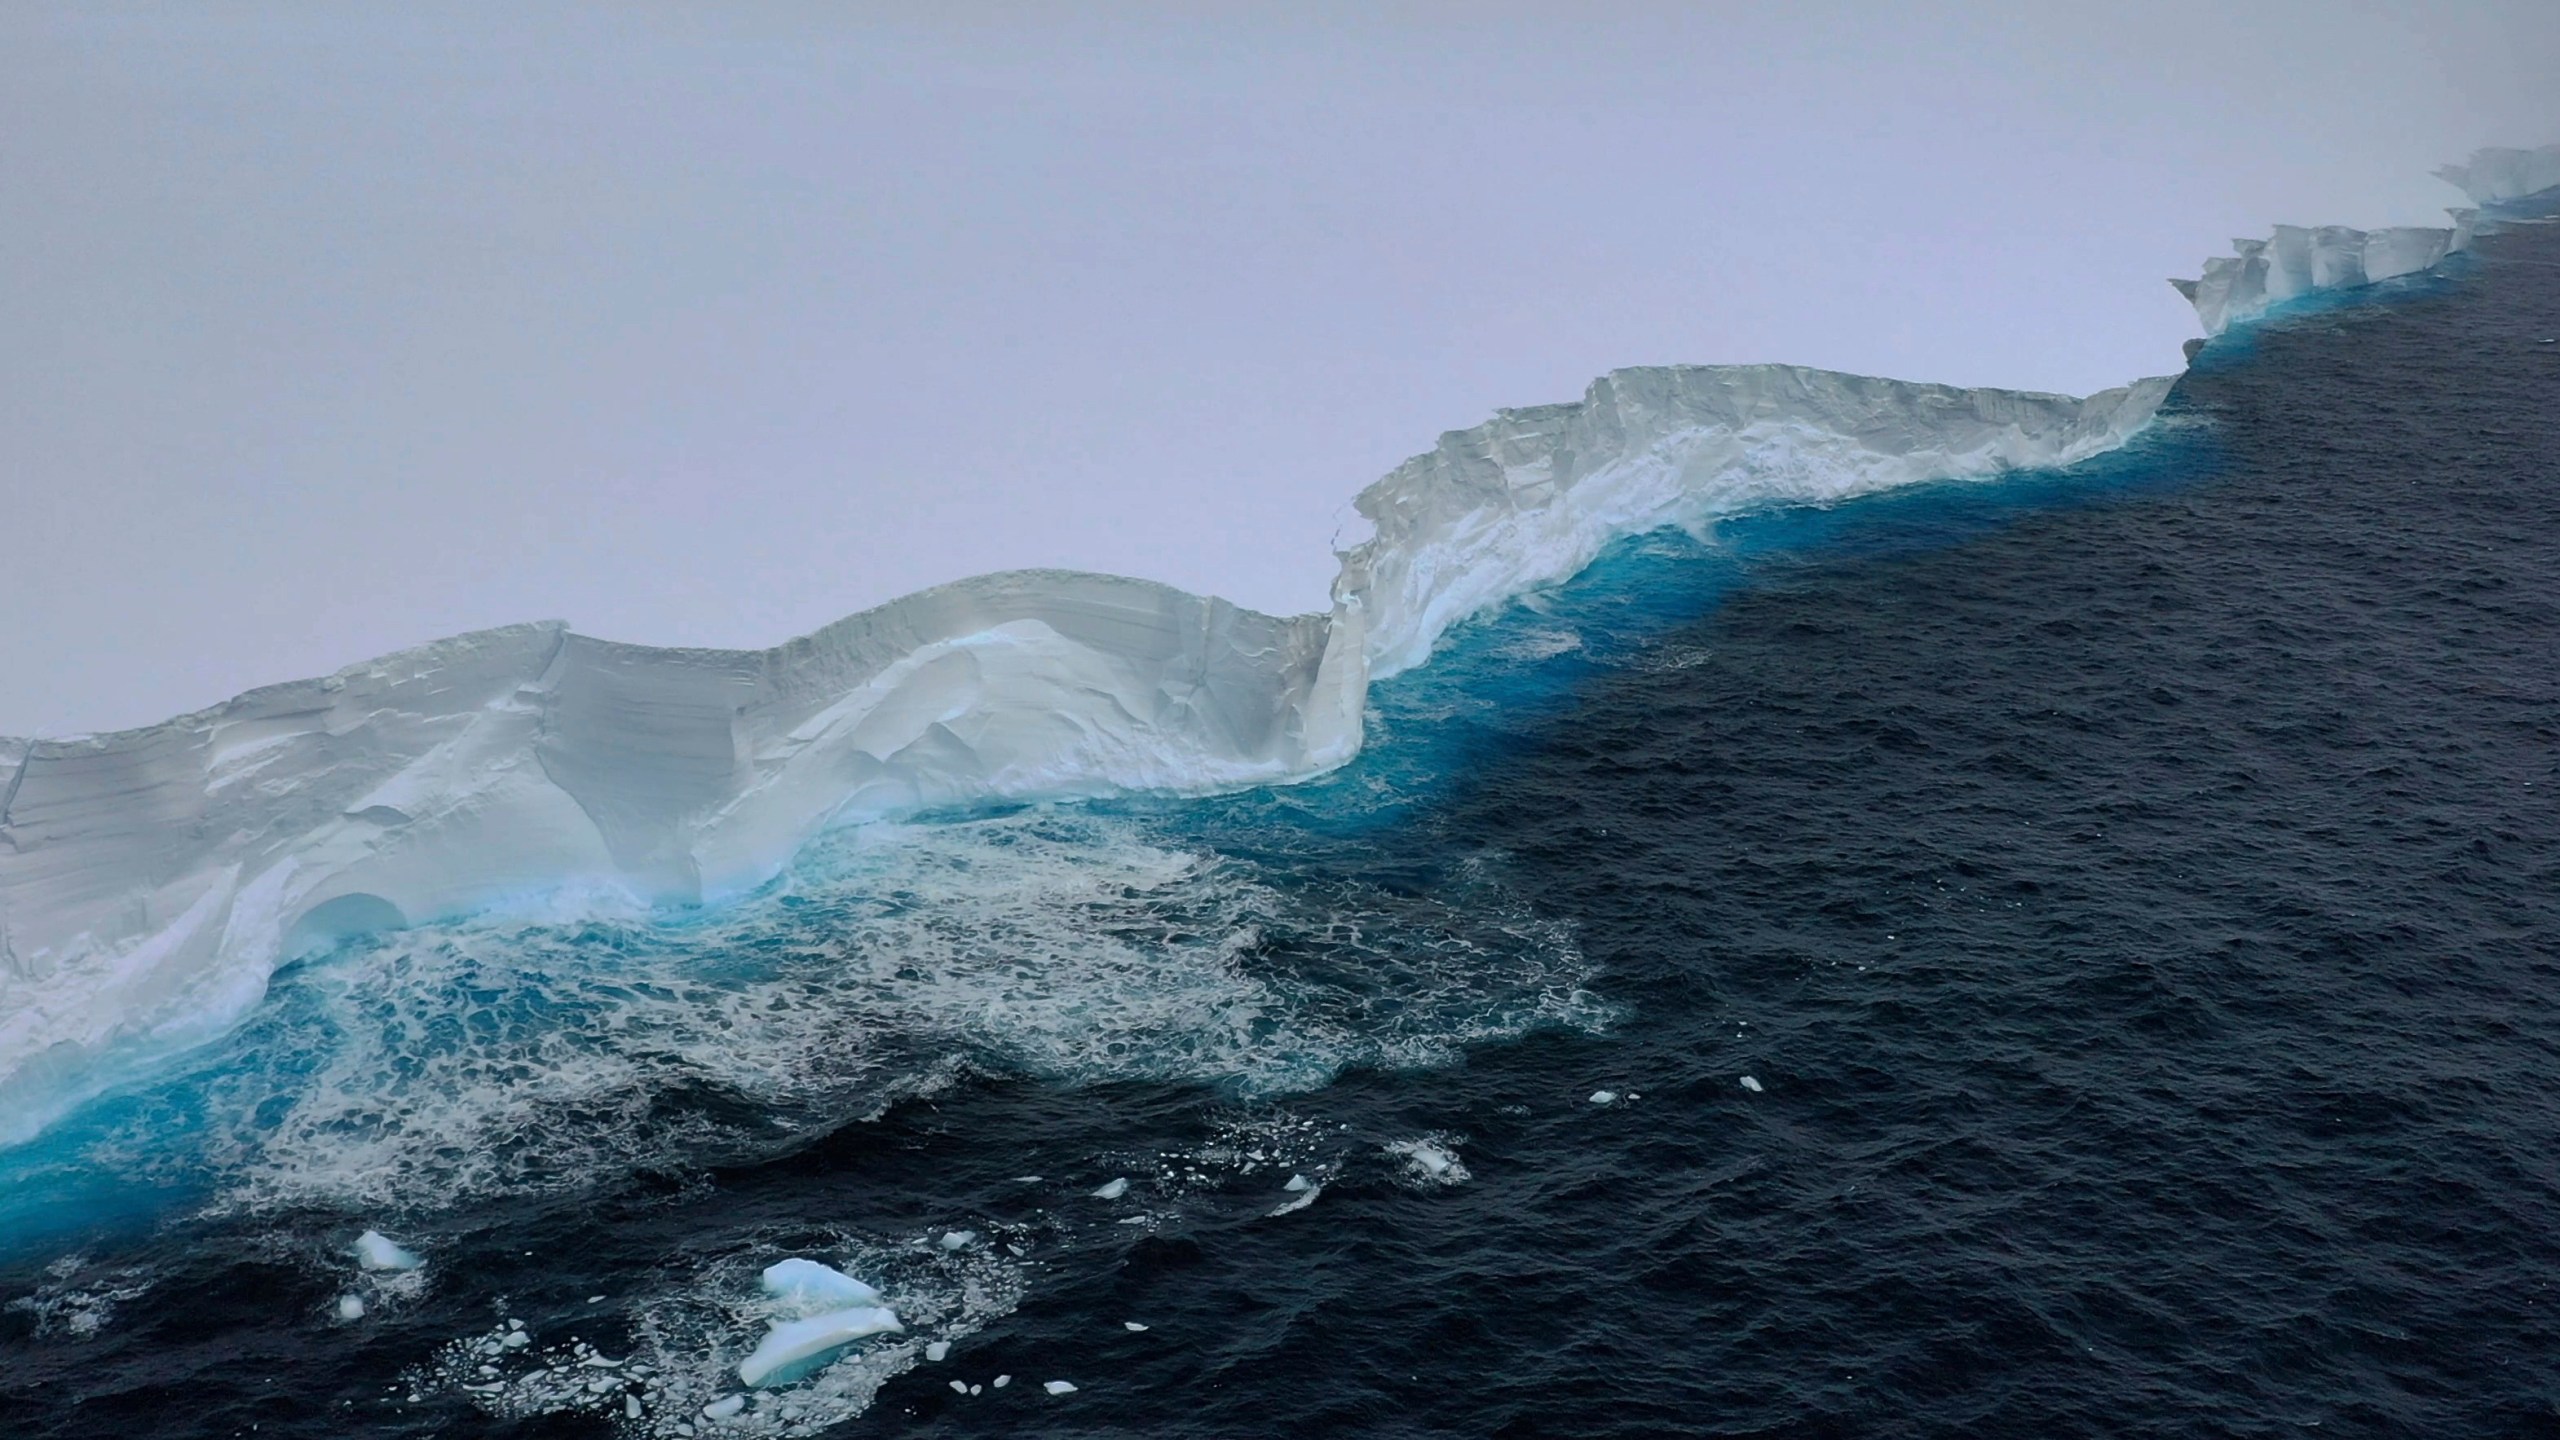 In this handout photo provided by the British Antarctic Survey, a view of the A23a iceberg is seen from the RRS Sir David Attenborough, Antarctica, Friday, Dec. 1, 2023. Britain's polar research ship has crossed paths with the largest iceberg in the world in a “lucky” encounter that enabled scientists to collect seawater samples around the colossal berg as it drifts out of Antarctic waters. The British Antarctic Survey said Monday, Dec. 4 that the RRS Sir David Attenborough passed the mega iceberg, known as the A23a, on Friday near the tip of the Antarctic Peninsula. (T. Gossman, M. Gascoyne, C. Grey/British Antarctic Survey via AP)